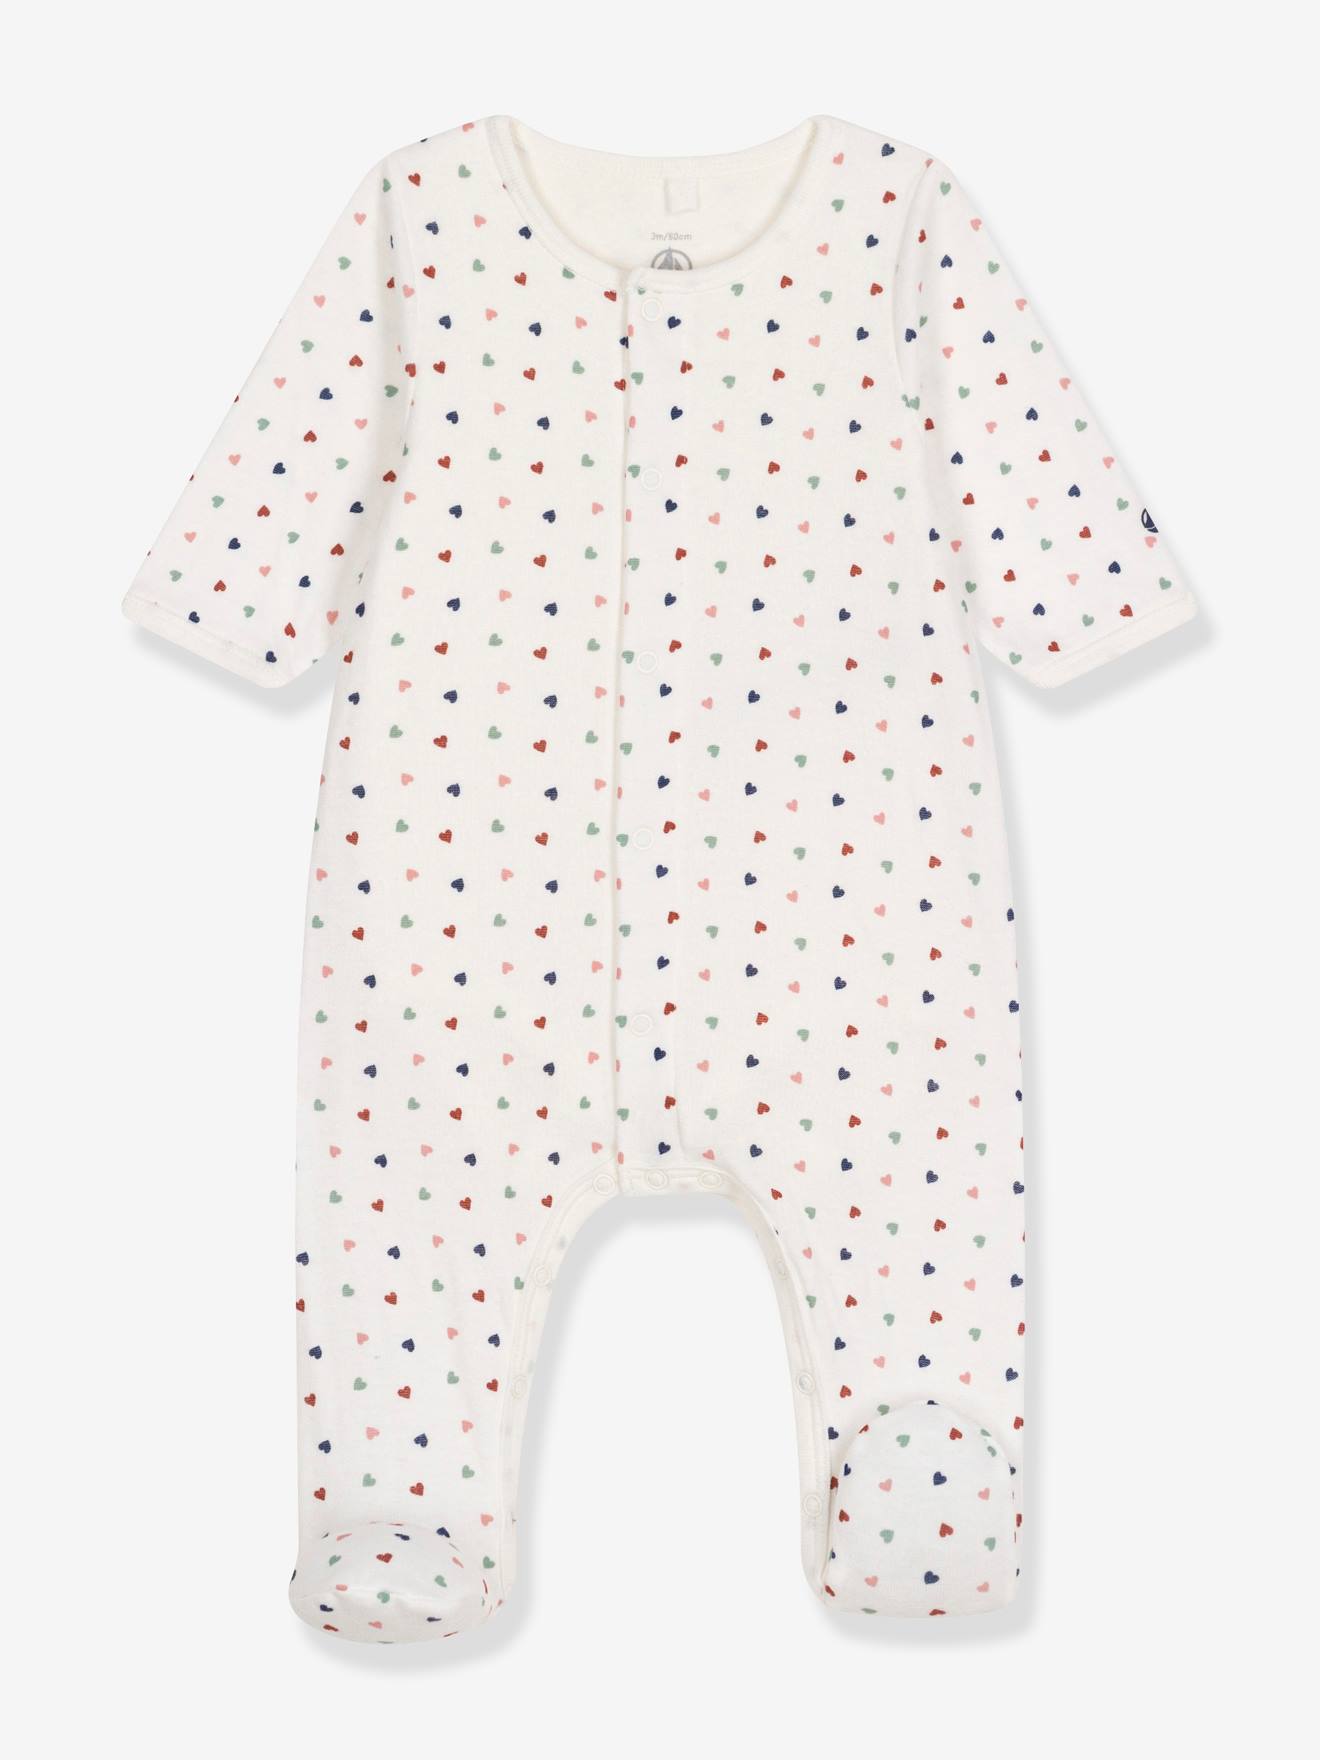 Bodyjama for Babies, with Hearts, by PETIT BATEAU printed white